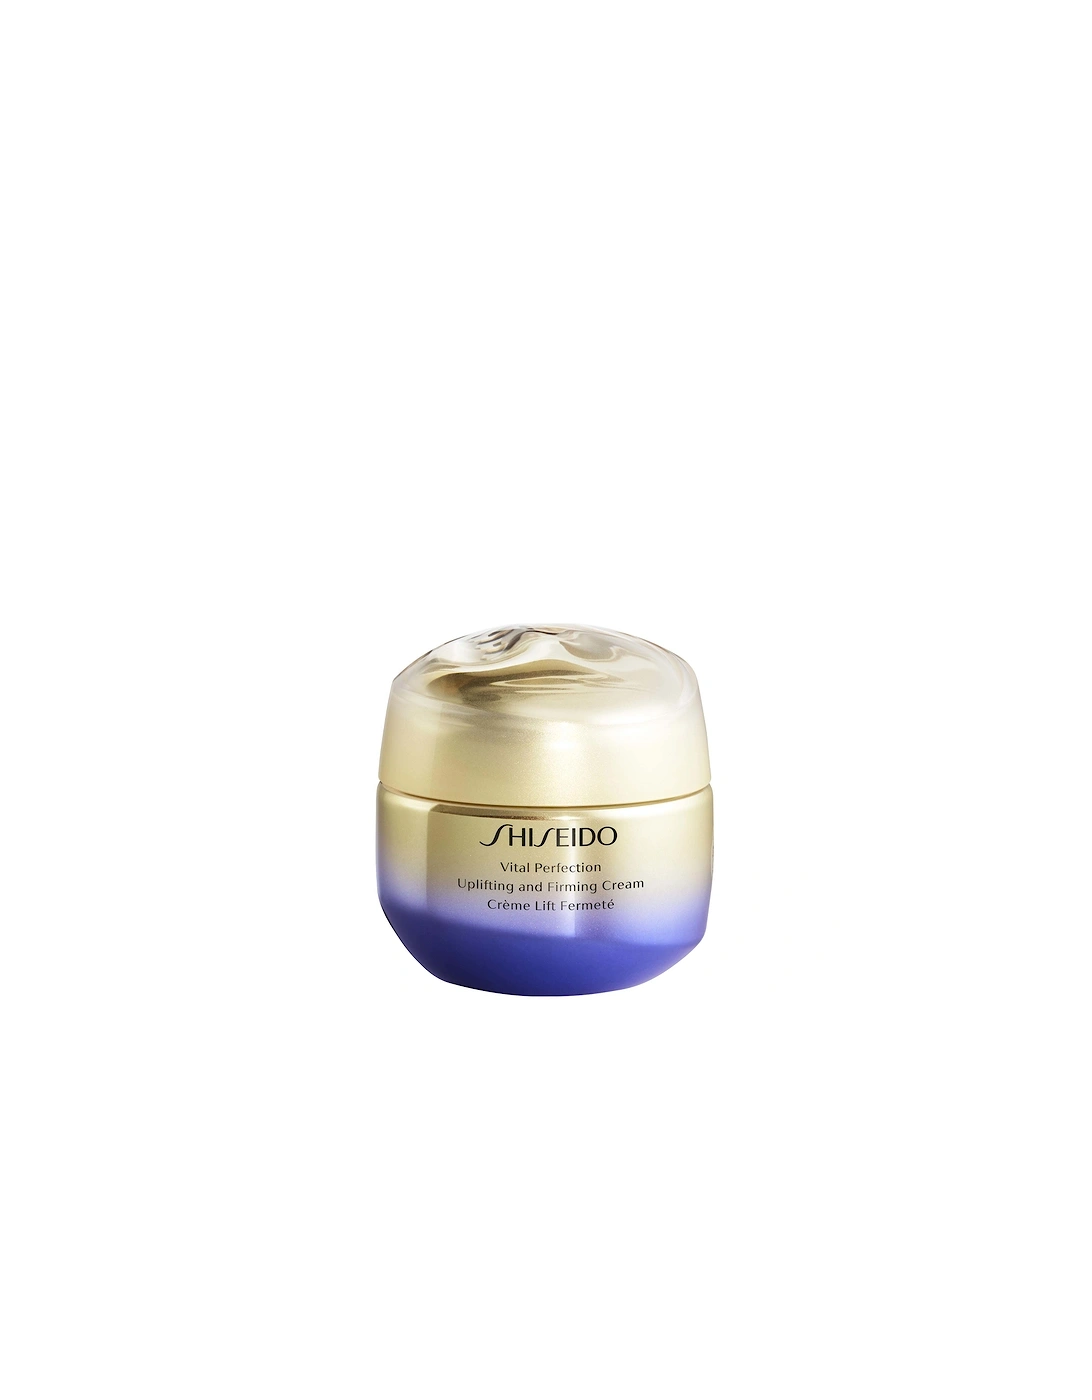 Vital Perfection Uplifting and Firming Cream 50ml - Shiseido, 2 of 1